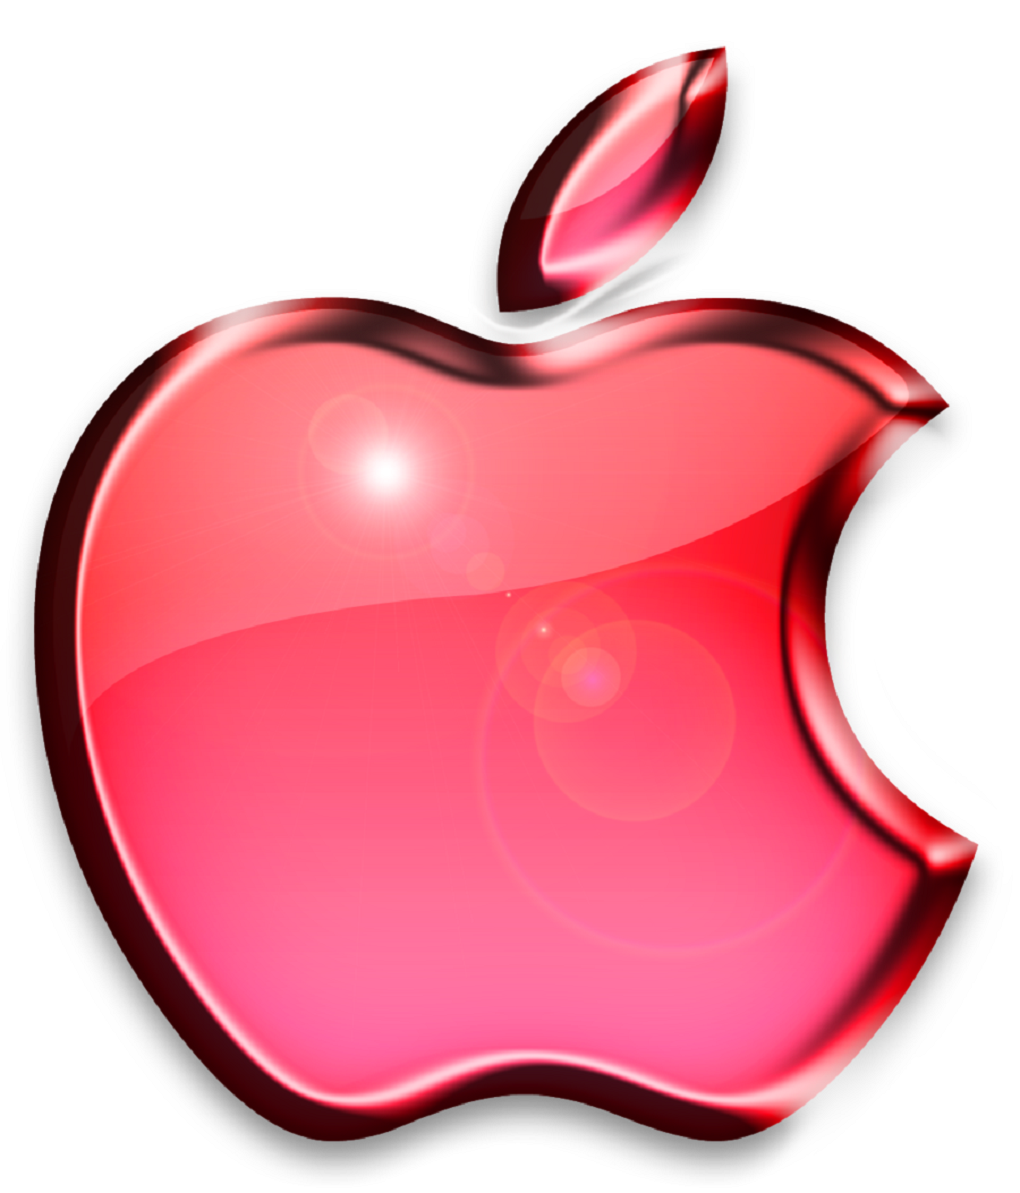 Apple Logo Images & HD Wallpapers free download